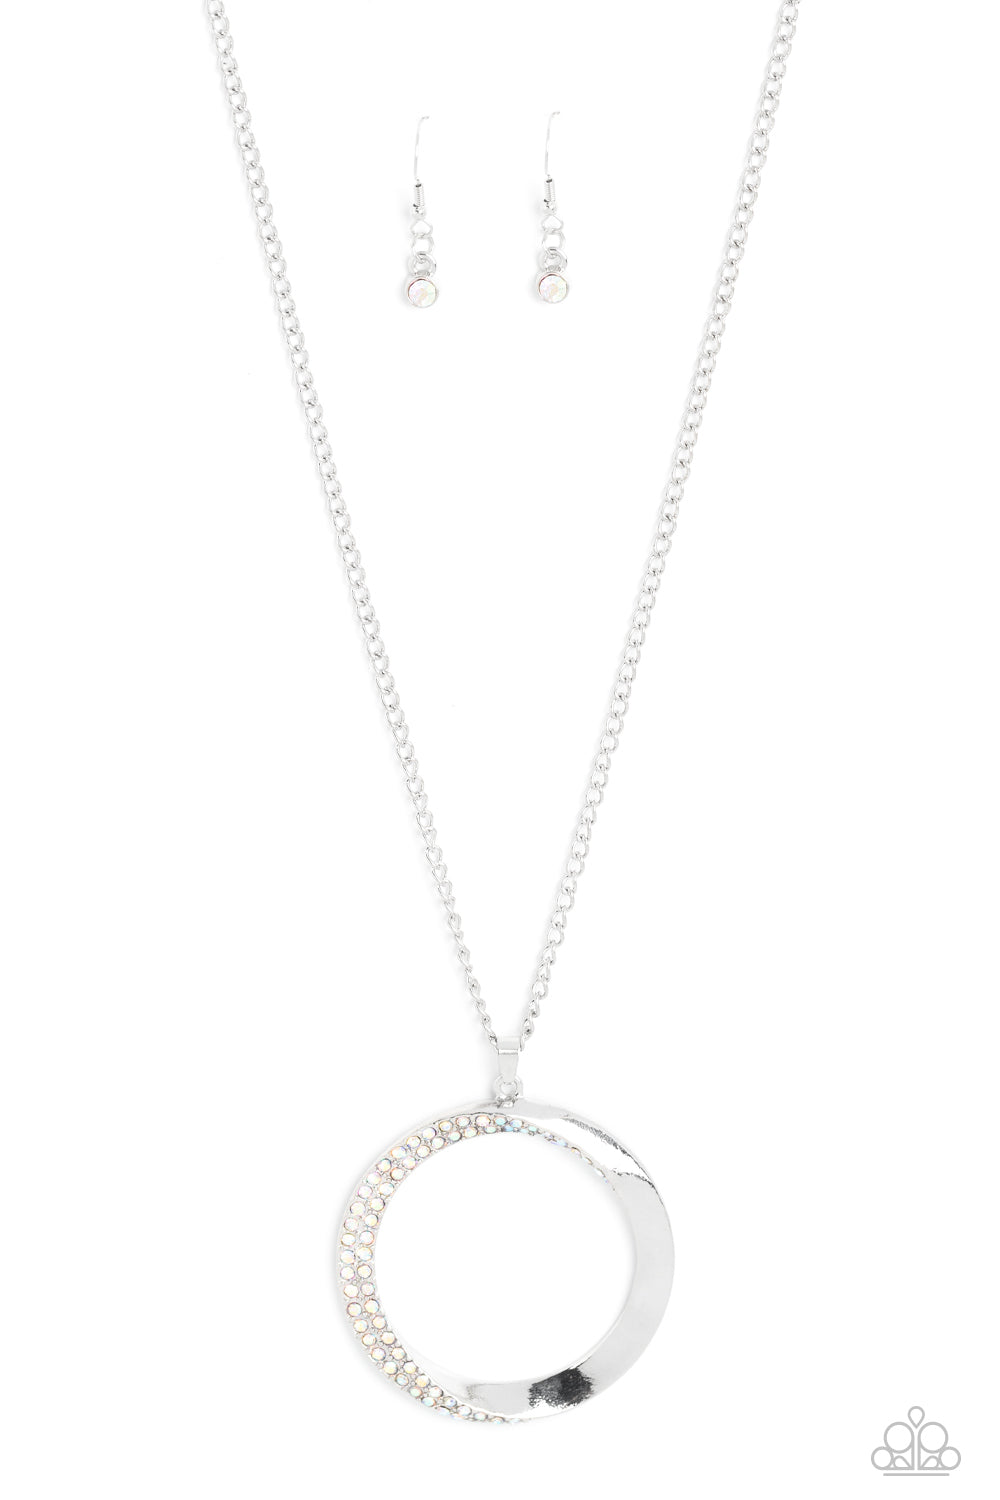 Paparazzi Accessories Encrusted Elegance - Multi An airy, oversized, warped, shiny silver hoop dangles down the chest from a classic silver chain. Two rows of dainty iridescent rhinestones encrust along the inner curve of the hoop for an understated, eleg